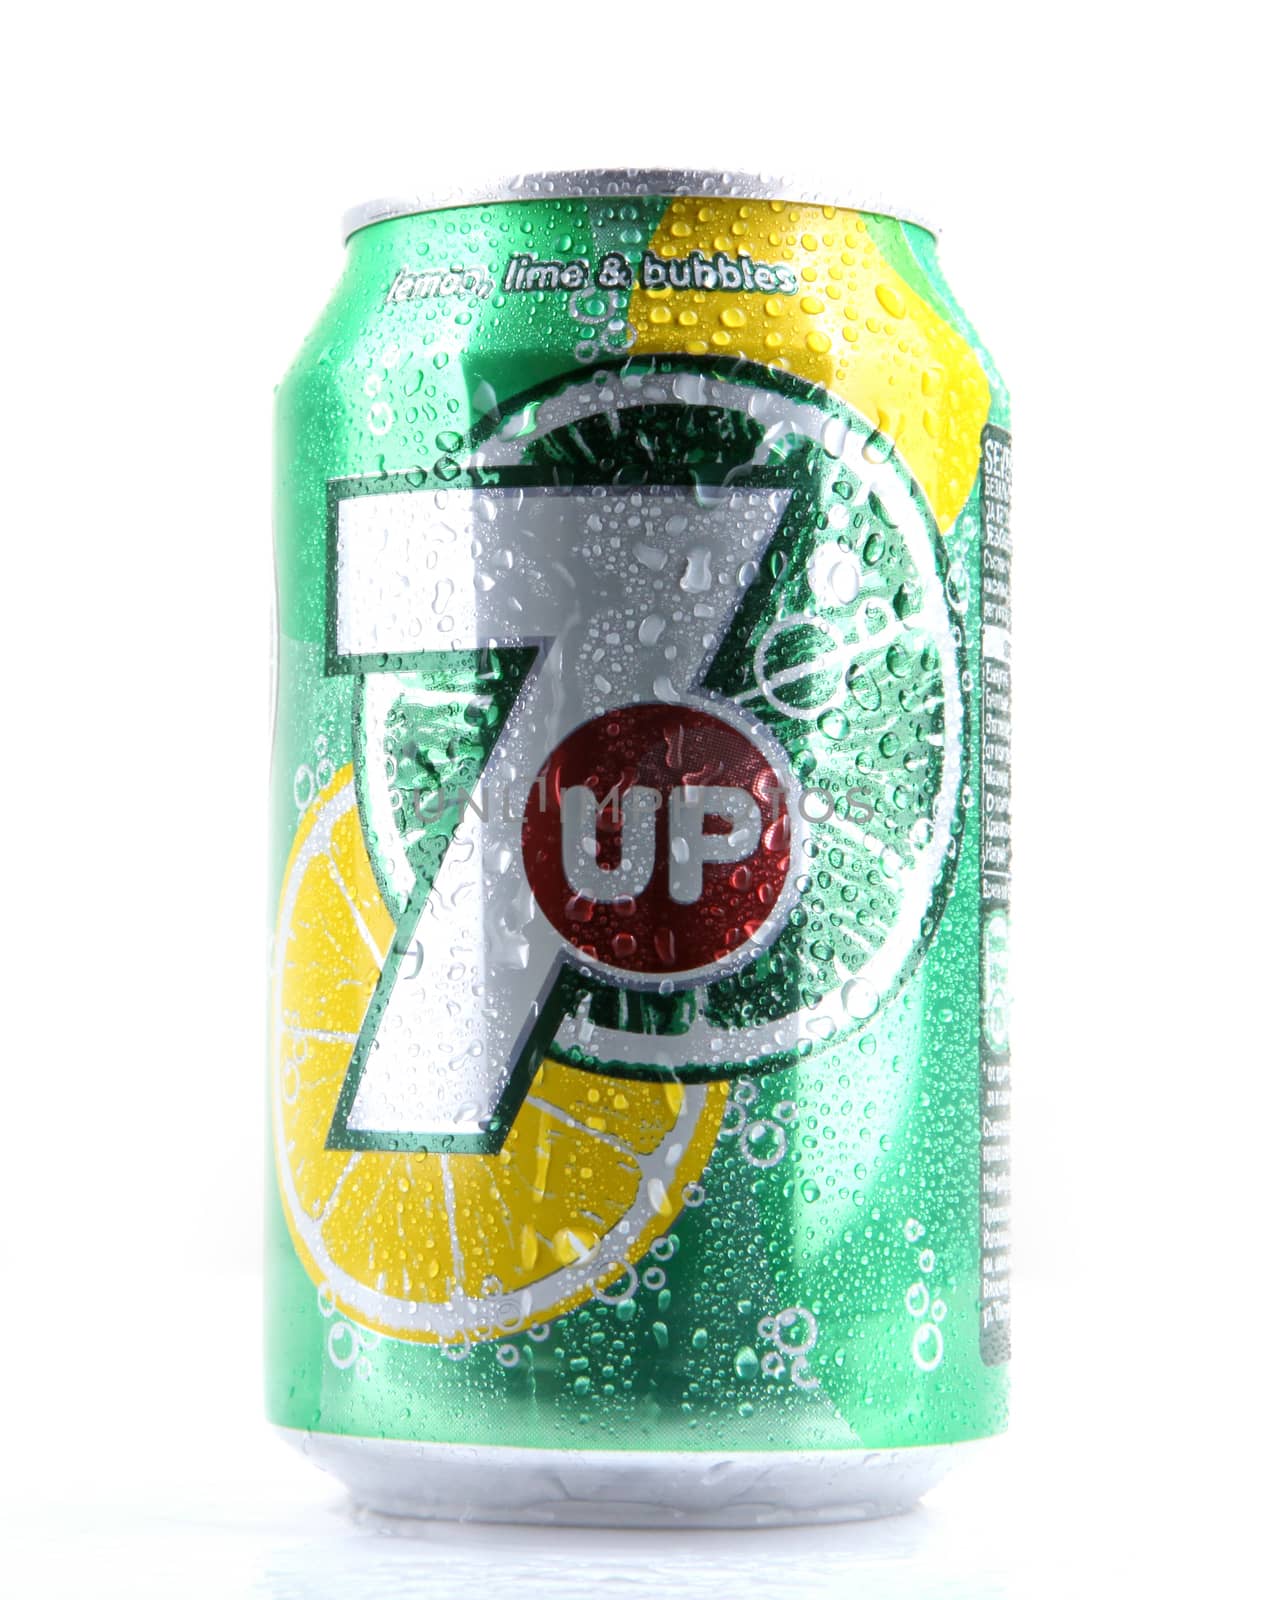 AYTOS, BULGARIA - MARCH 14, 2014: 7 Up isolated on white background. 7 Up is a brand of lemon-lime flavored, non-caffeinated soft drink.